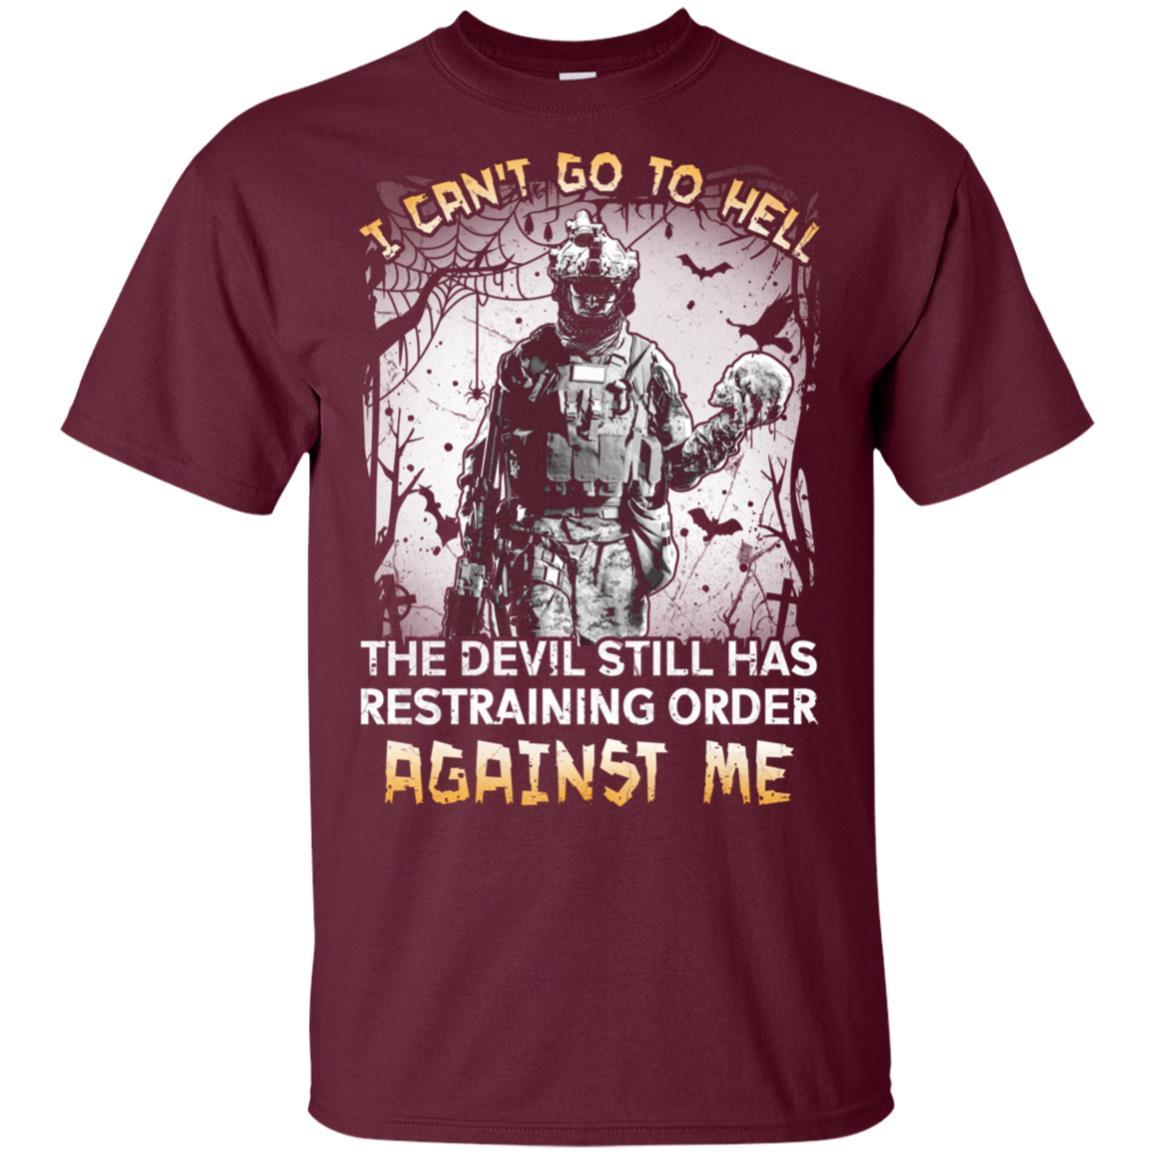 Military T-Shirt "I Can't Go To Hell The Devil Still Has Restraining Order Against Me On" Front-TShirt-General-Veterans Nation